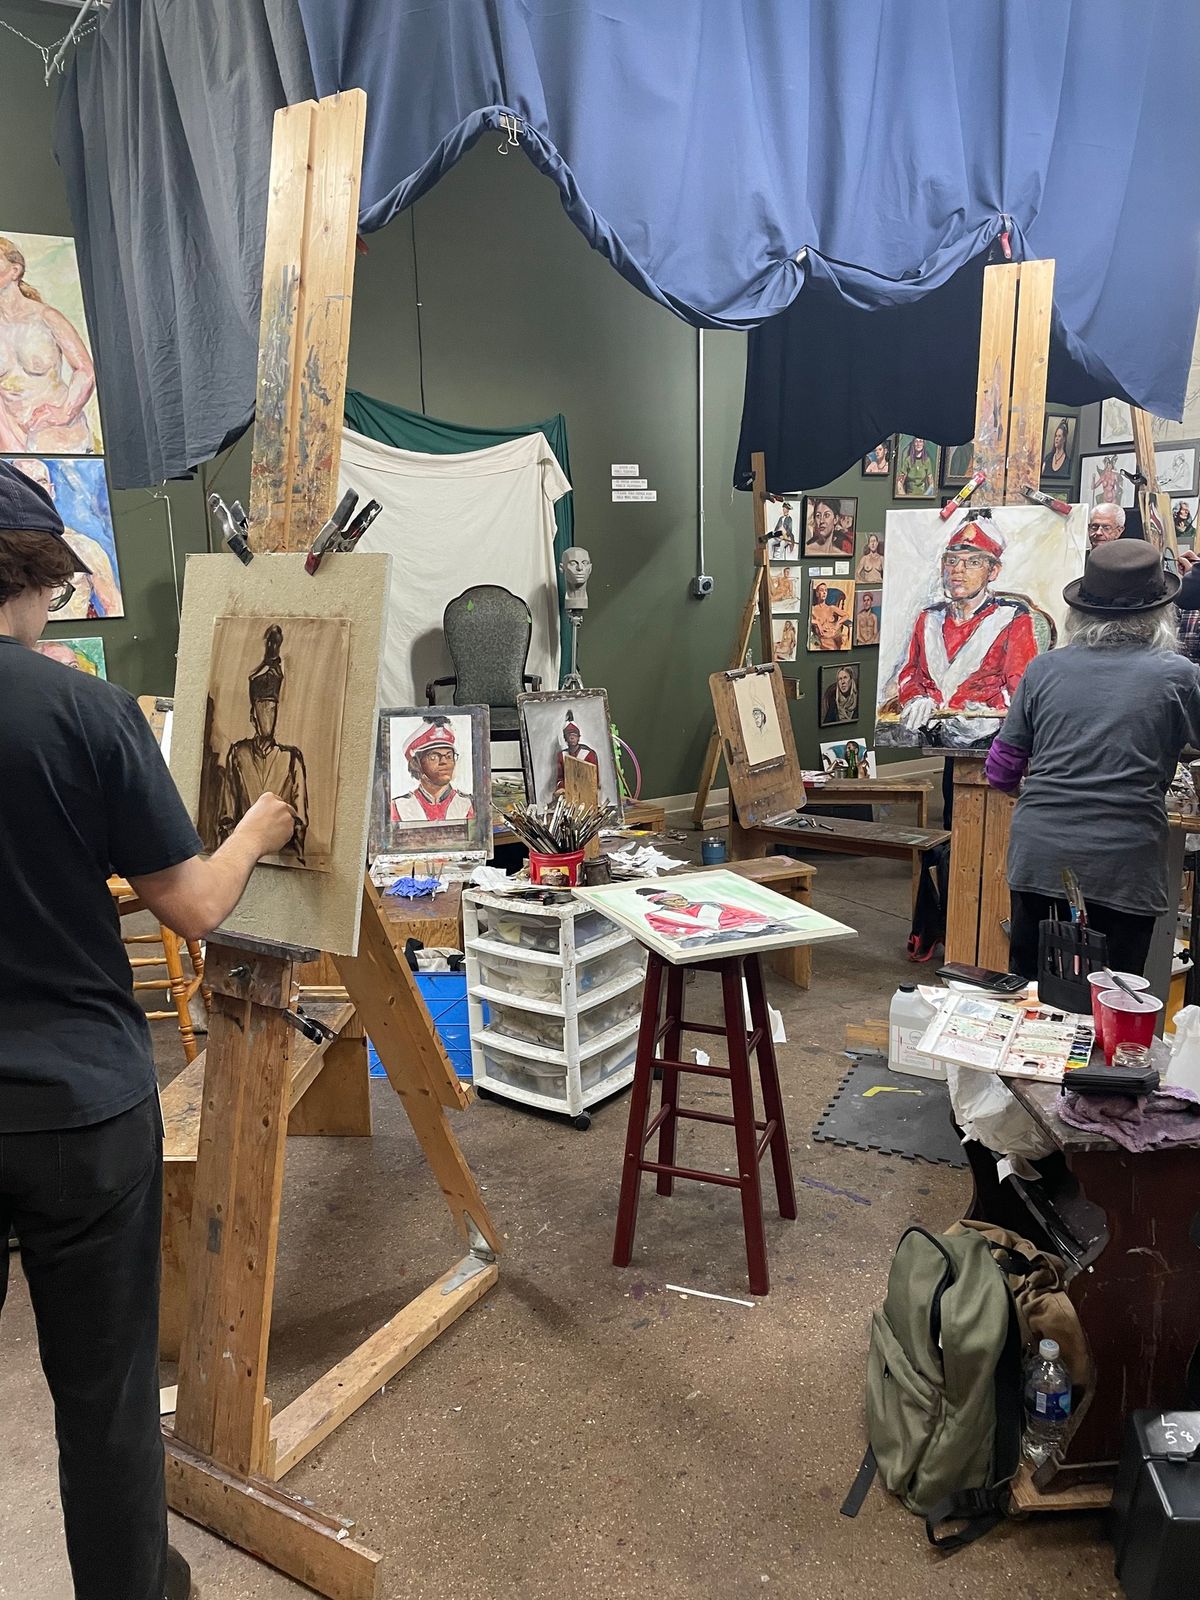 The Portrait in Oil - Workshop